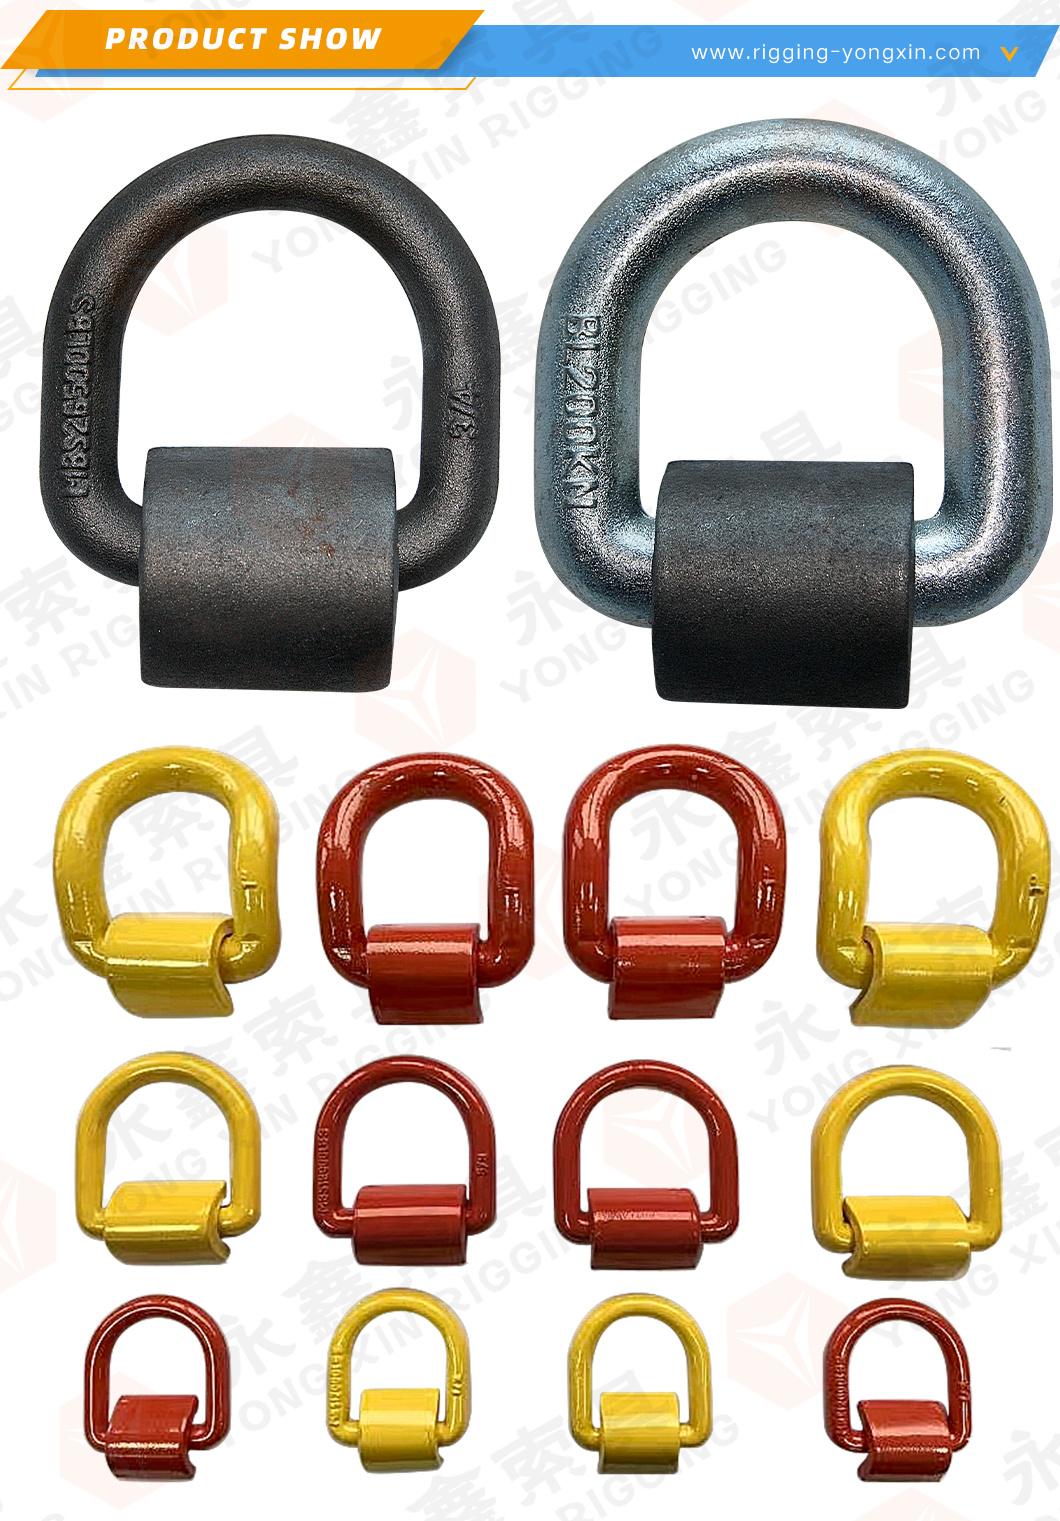 Drop Forged Carbon D-Ring for Endless Industrial and Marine Rigging Aplications